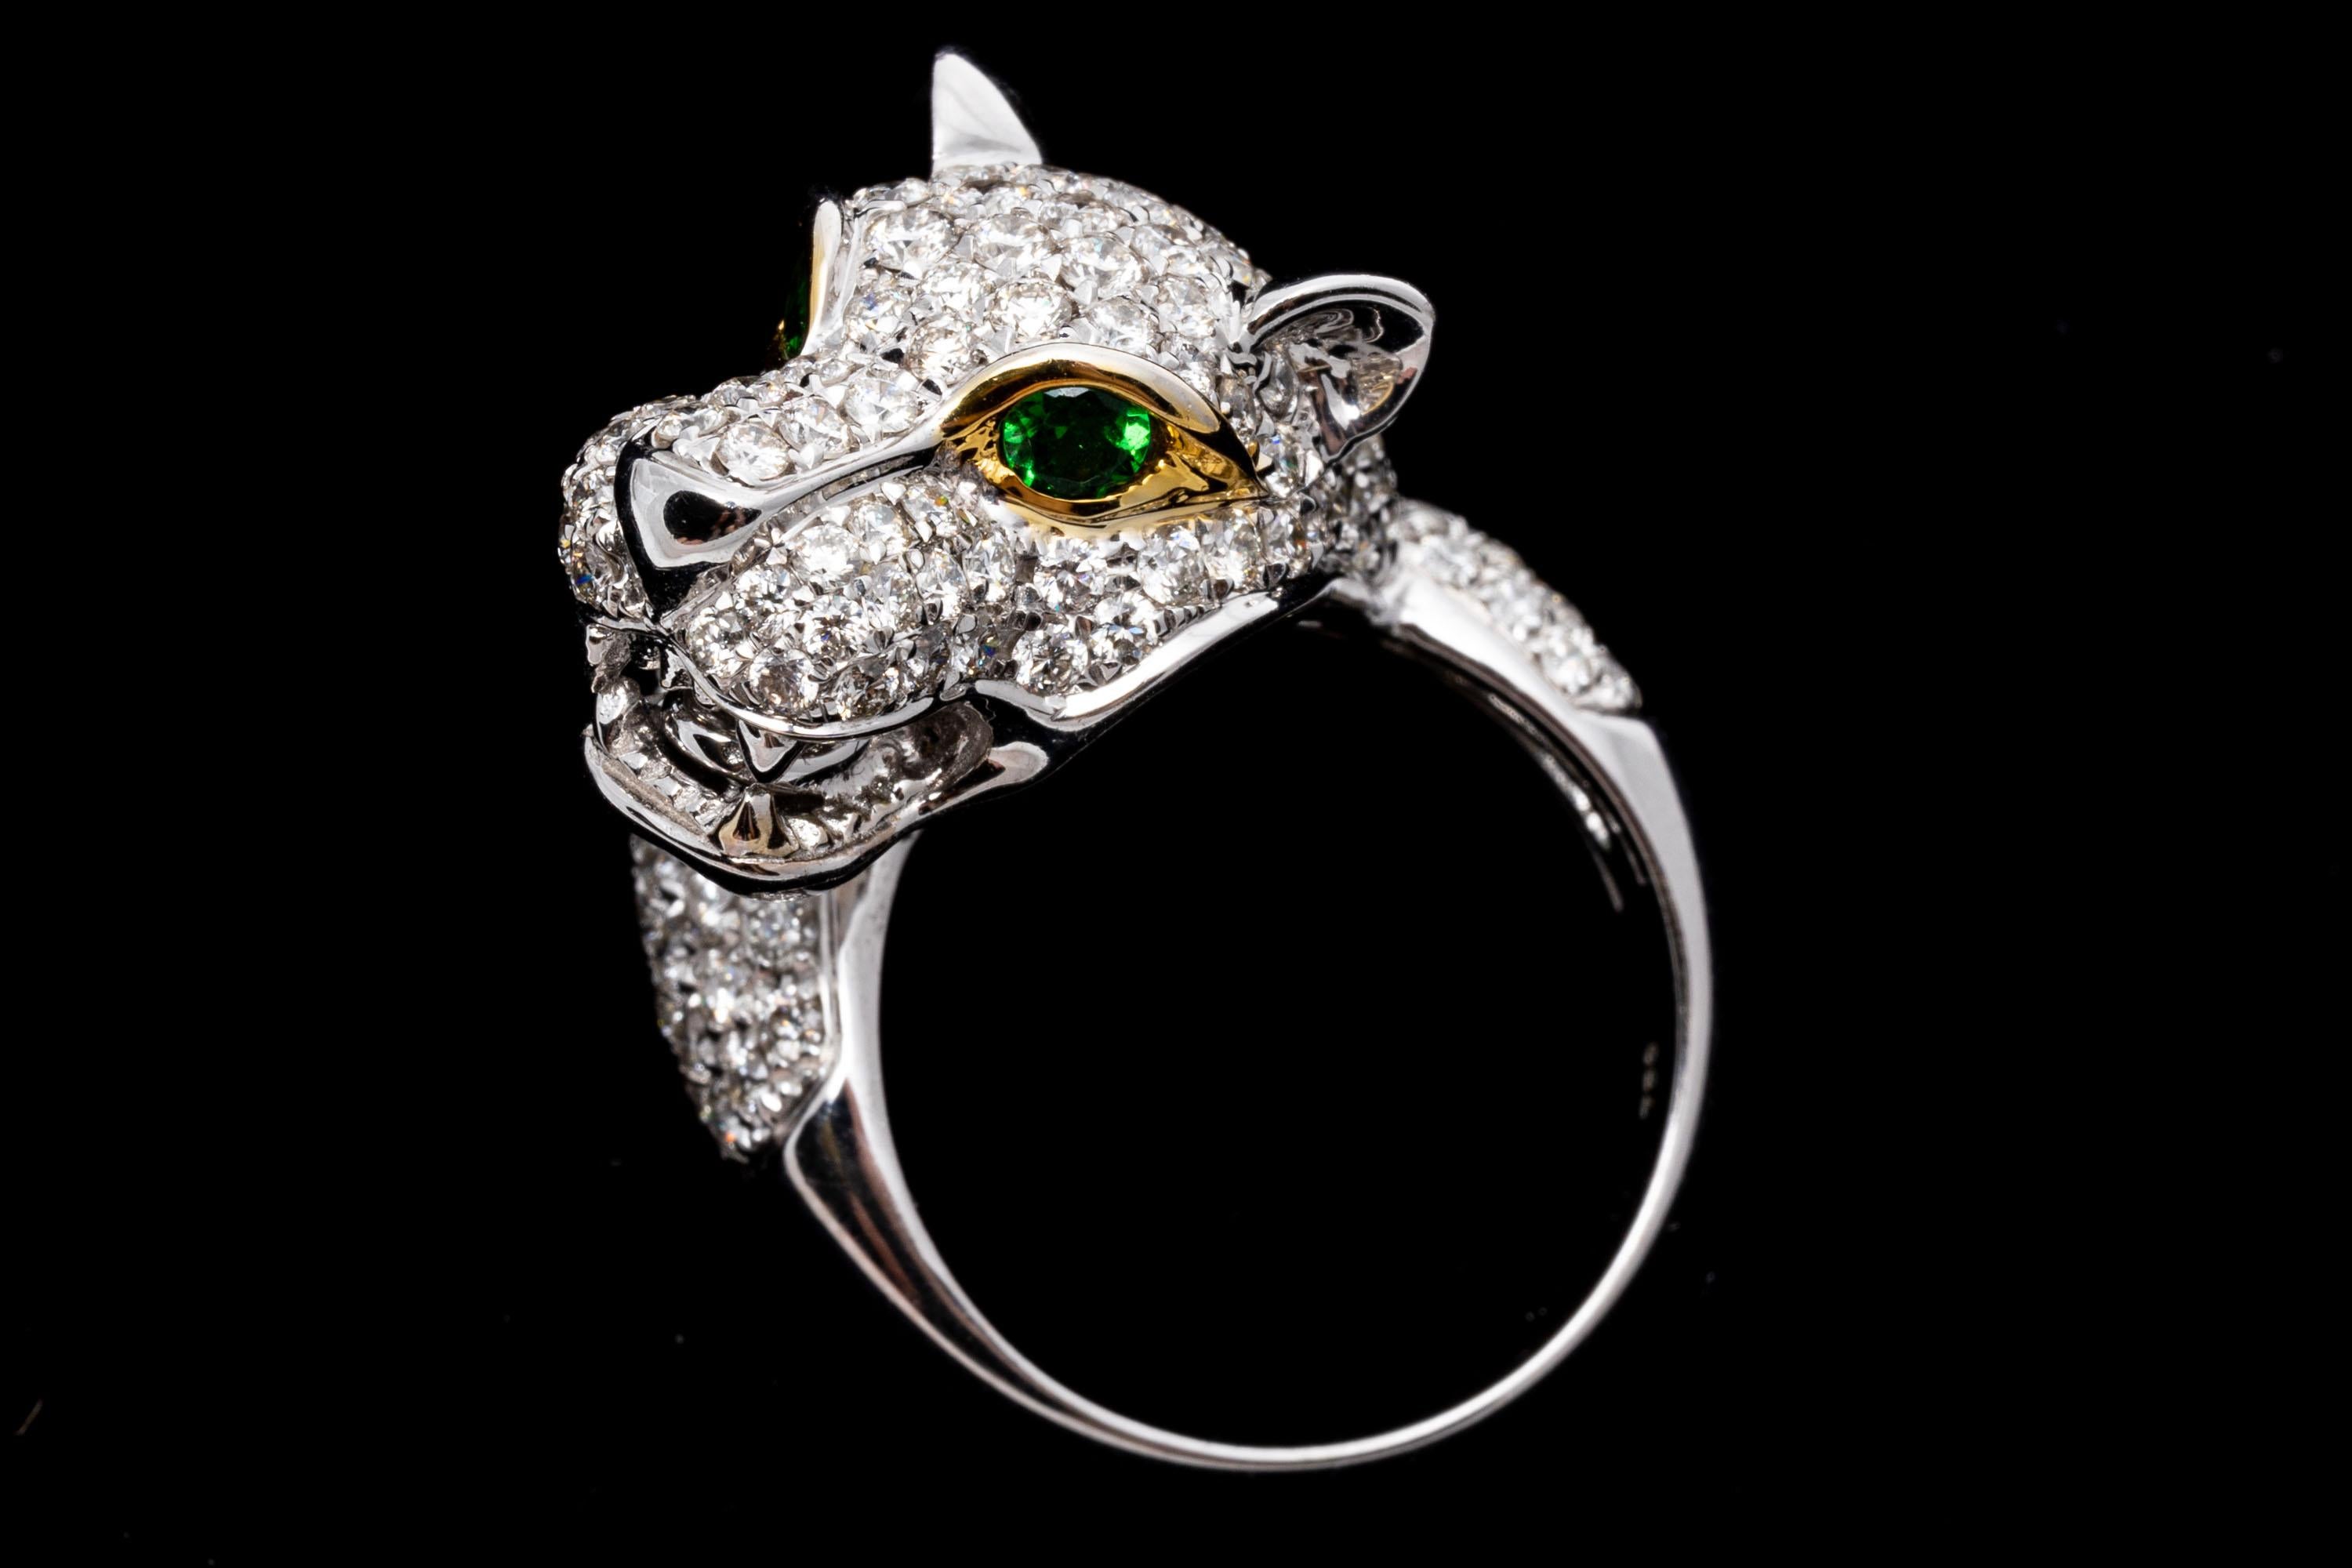 18k White Gold Pave Diamond Figural Panther Head Ring, App. 2.75 TCW For Sale 2